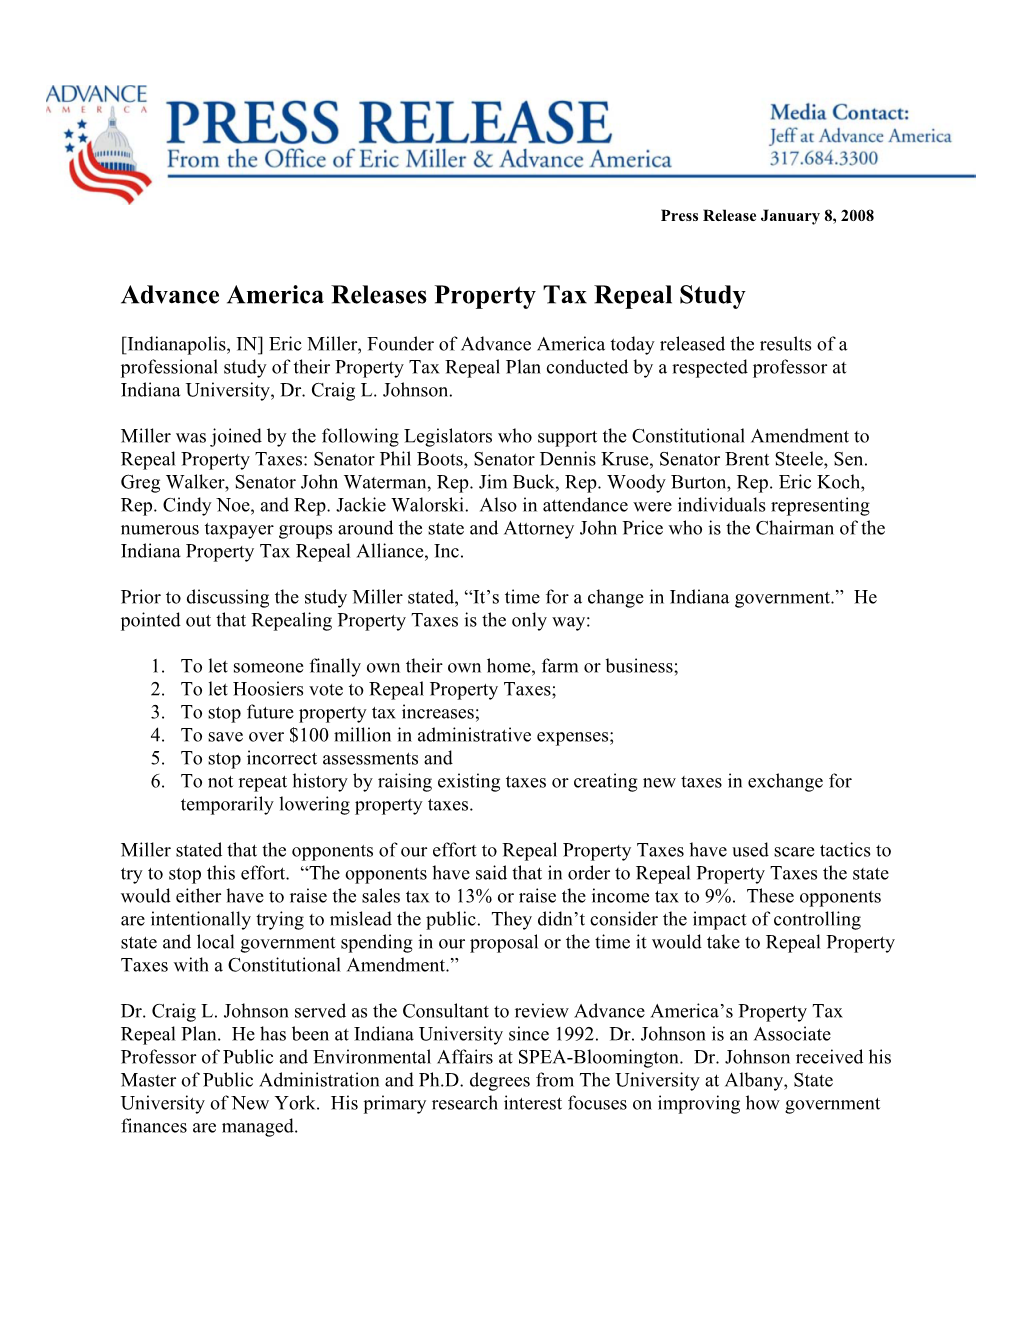 Advance America Releases Property Tax Repeal Study